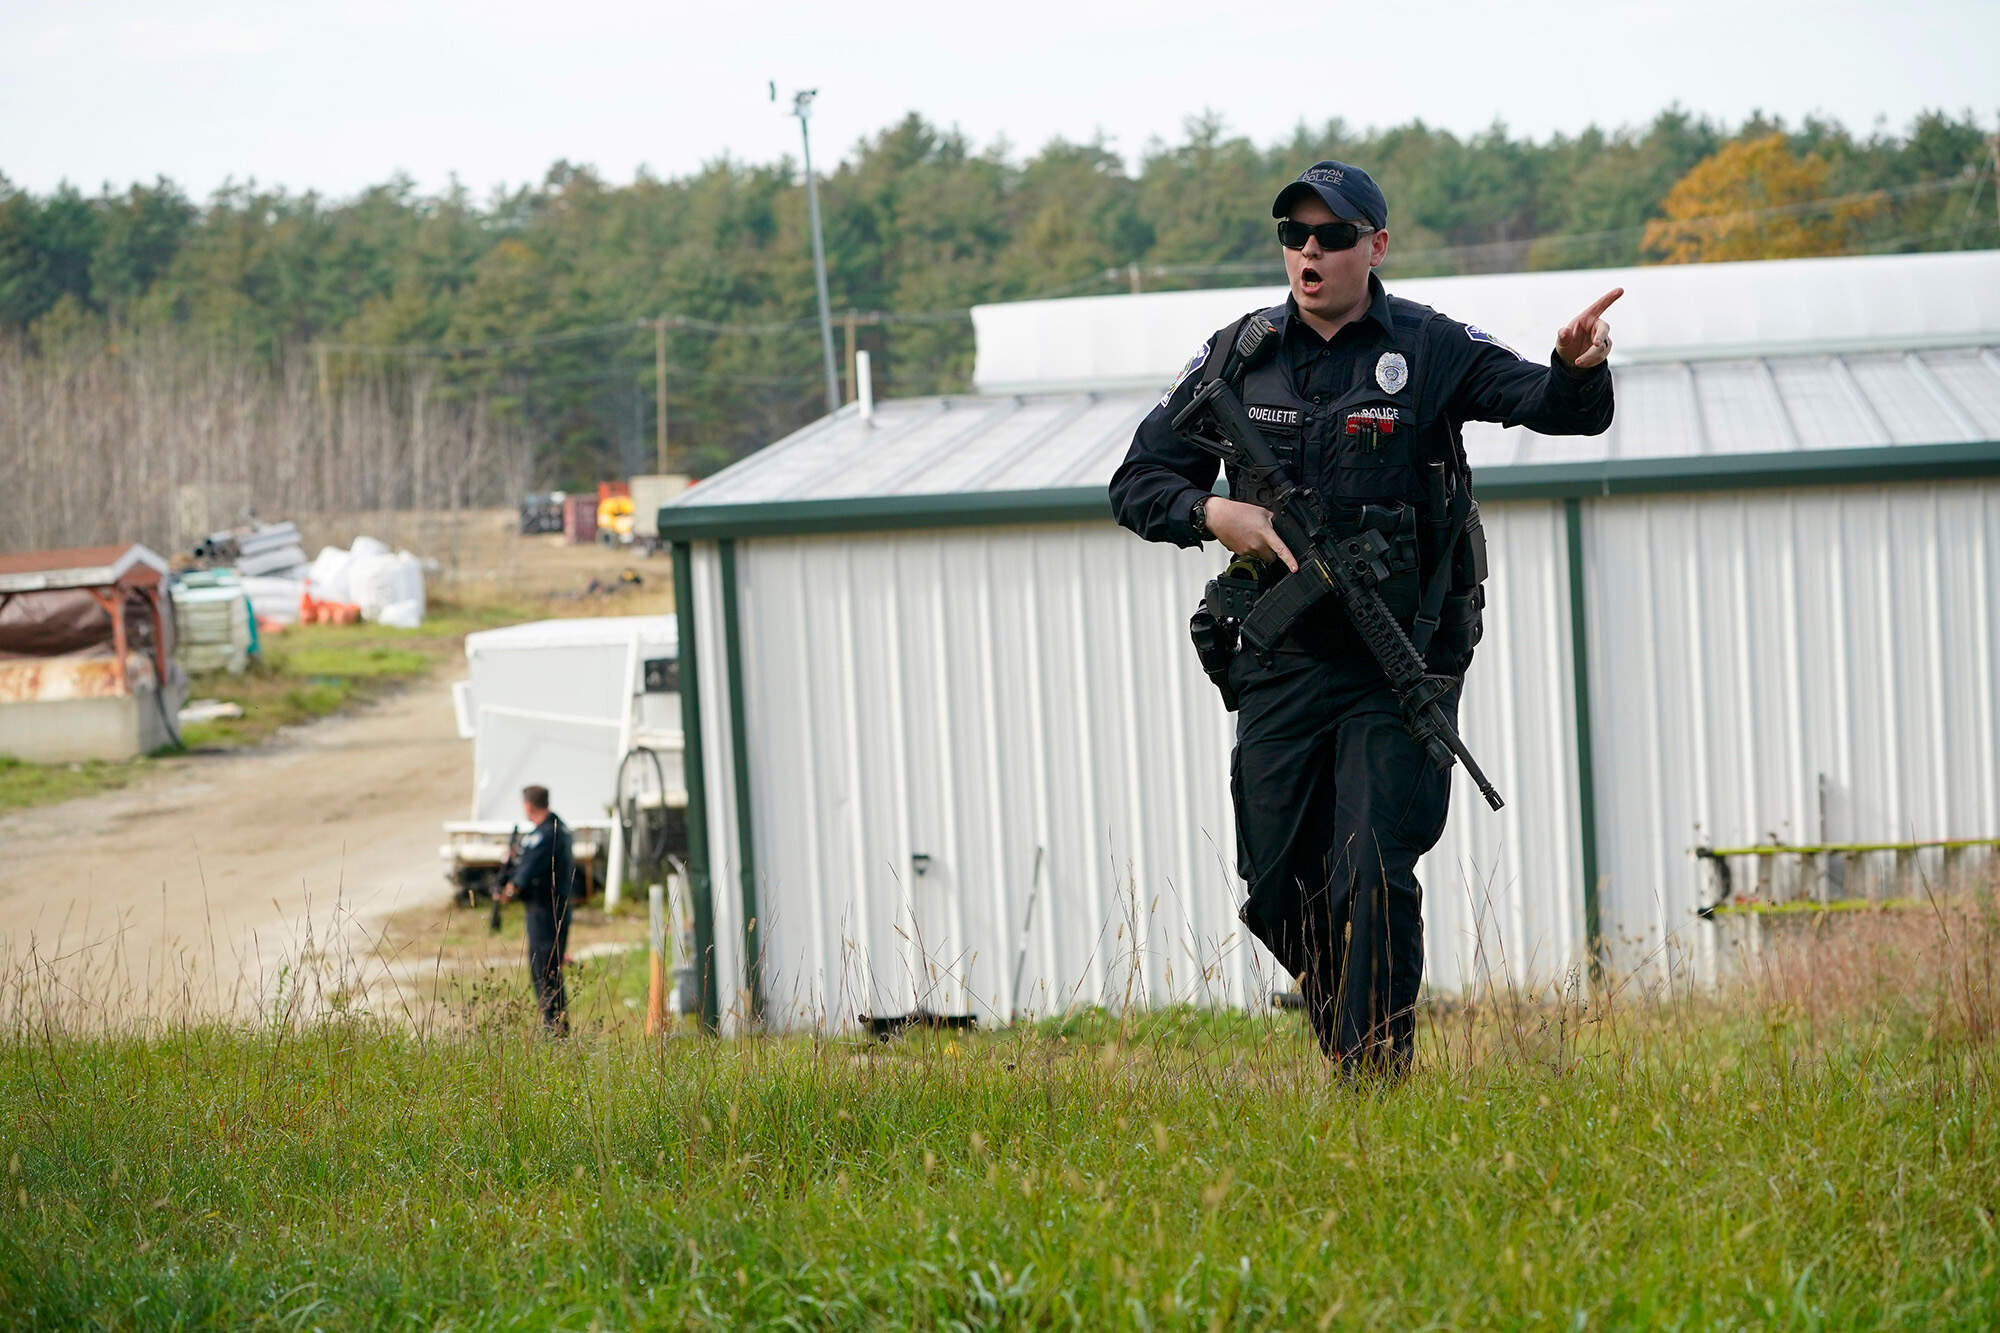 A police officer gives an order on Friday during a search at a farm in Lisbon, Maine, for the suspect in this week's deadly mass shootings. (Robert F. Bukaty/AP)